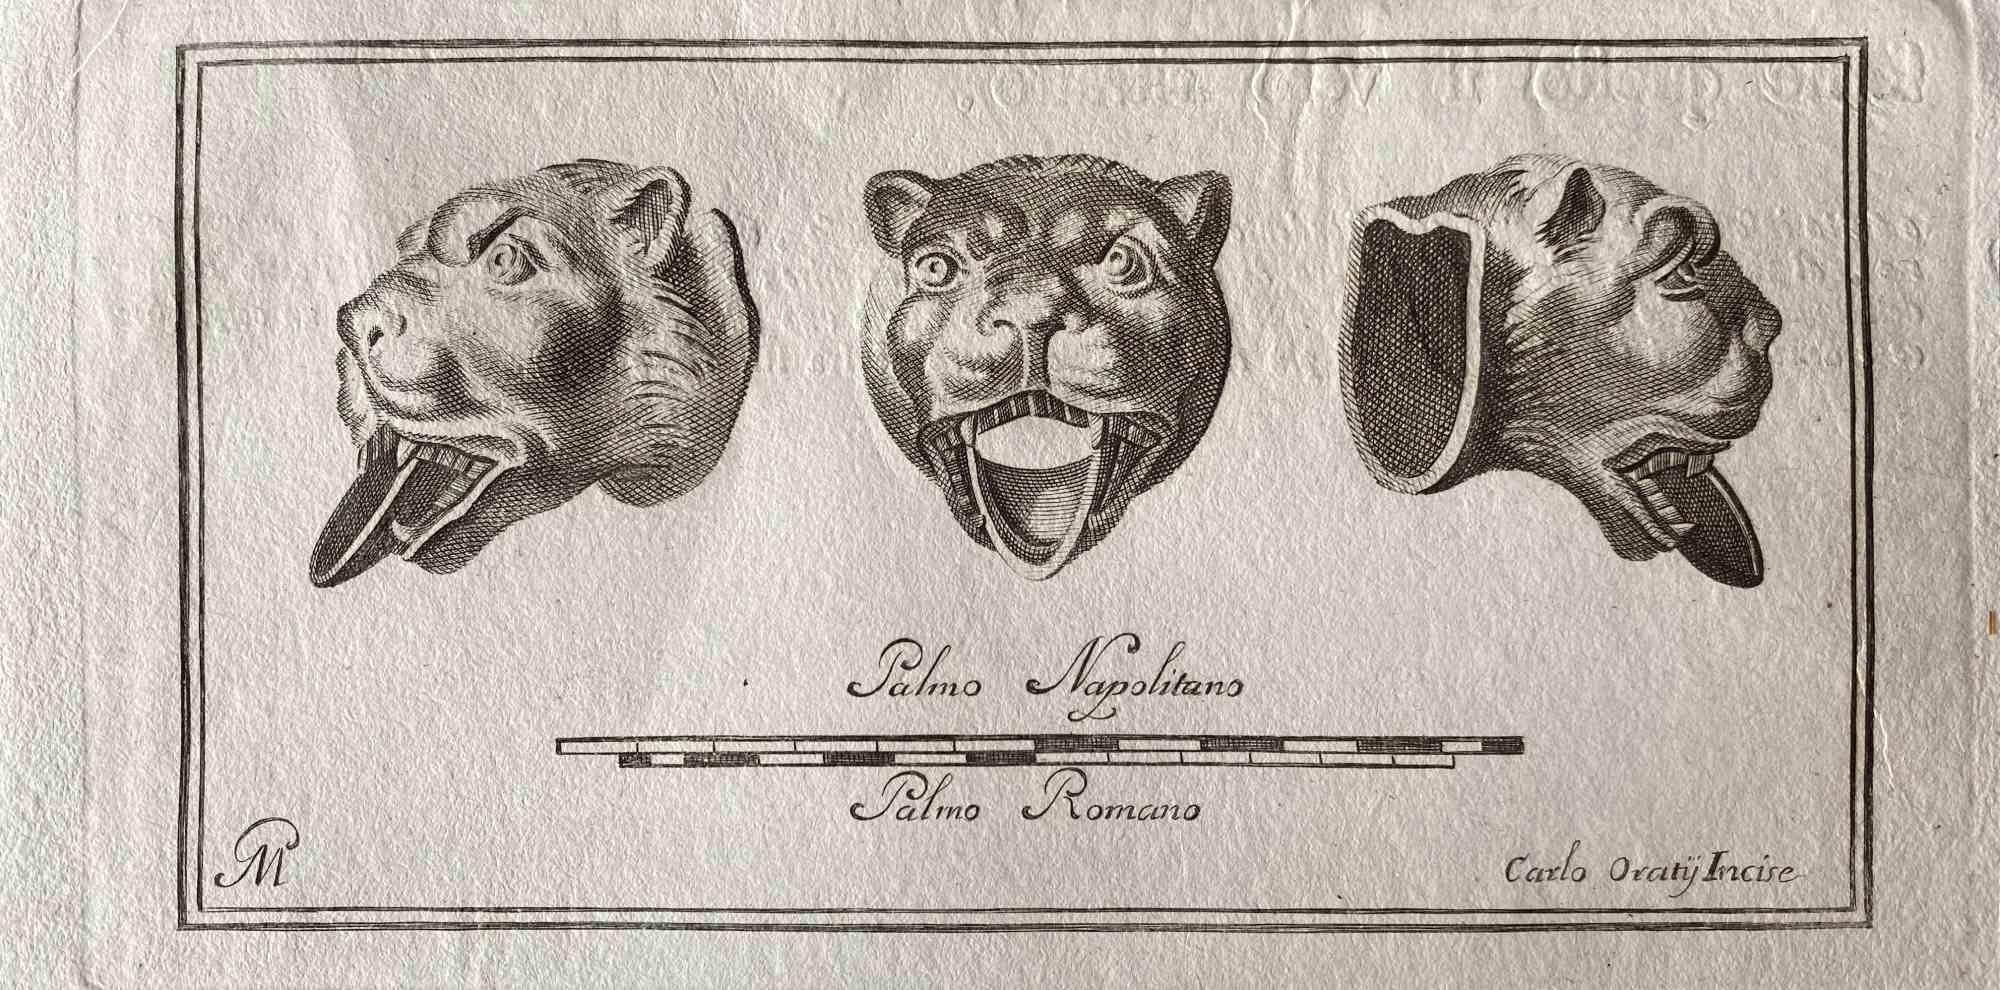 Unknown Figurative Print - Animal Figures from Ancient Rome - Original Etching by Various Masters - 1750s